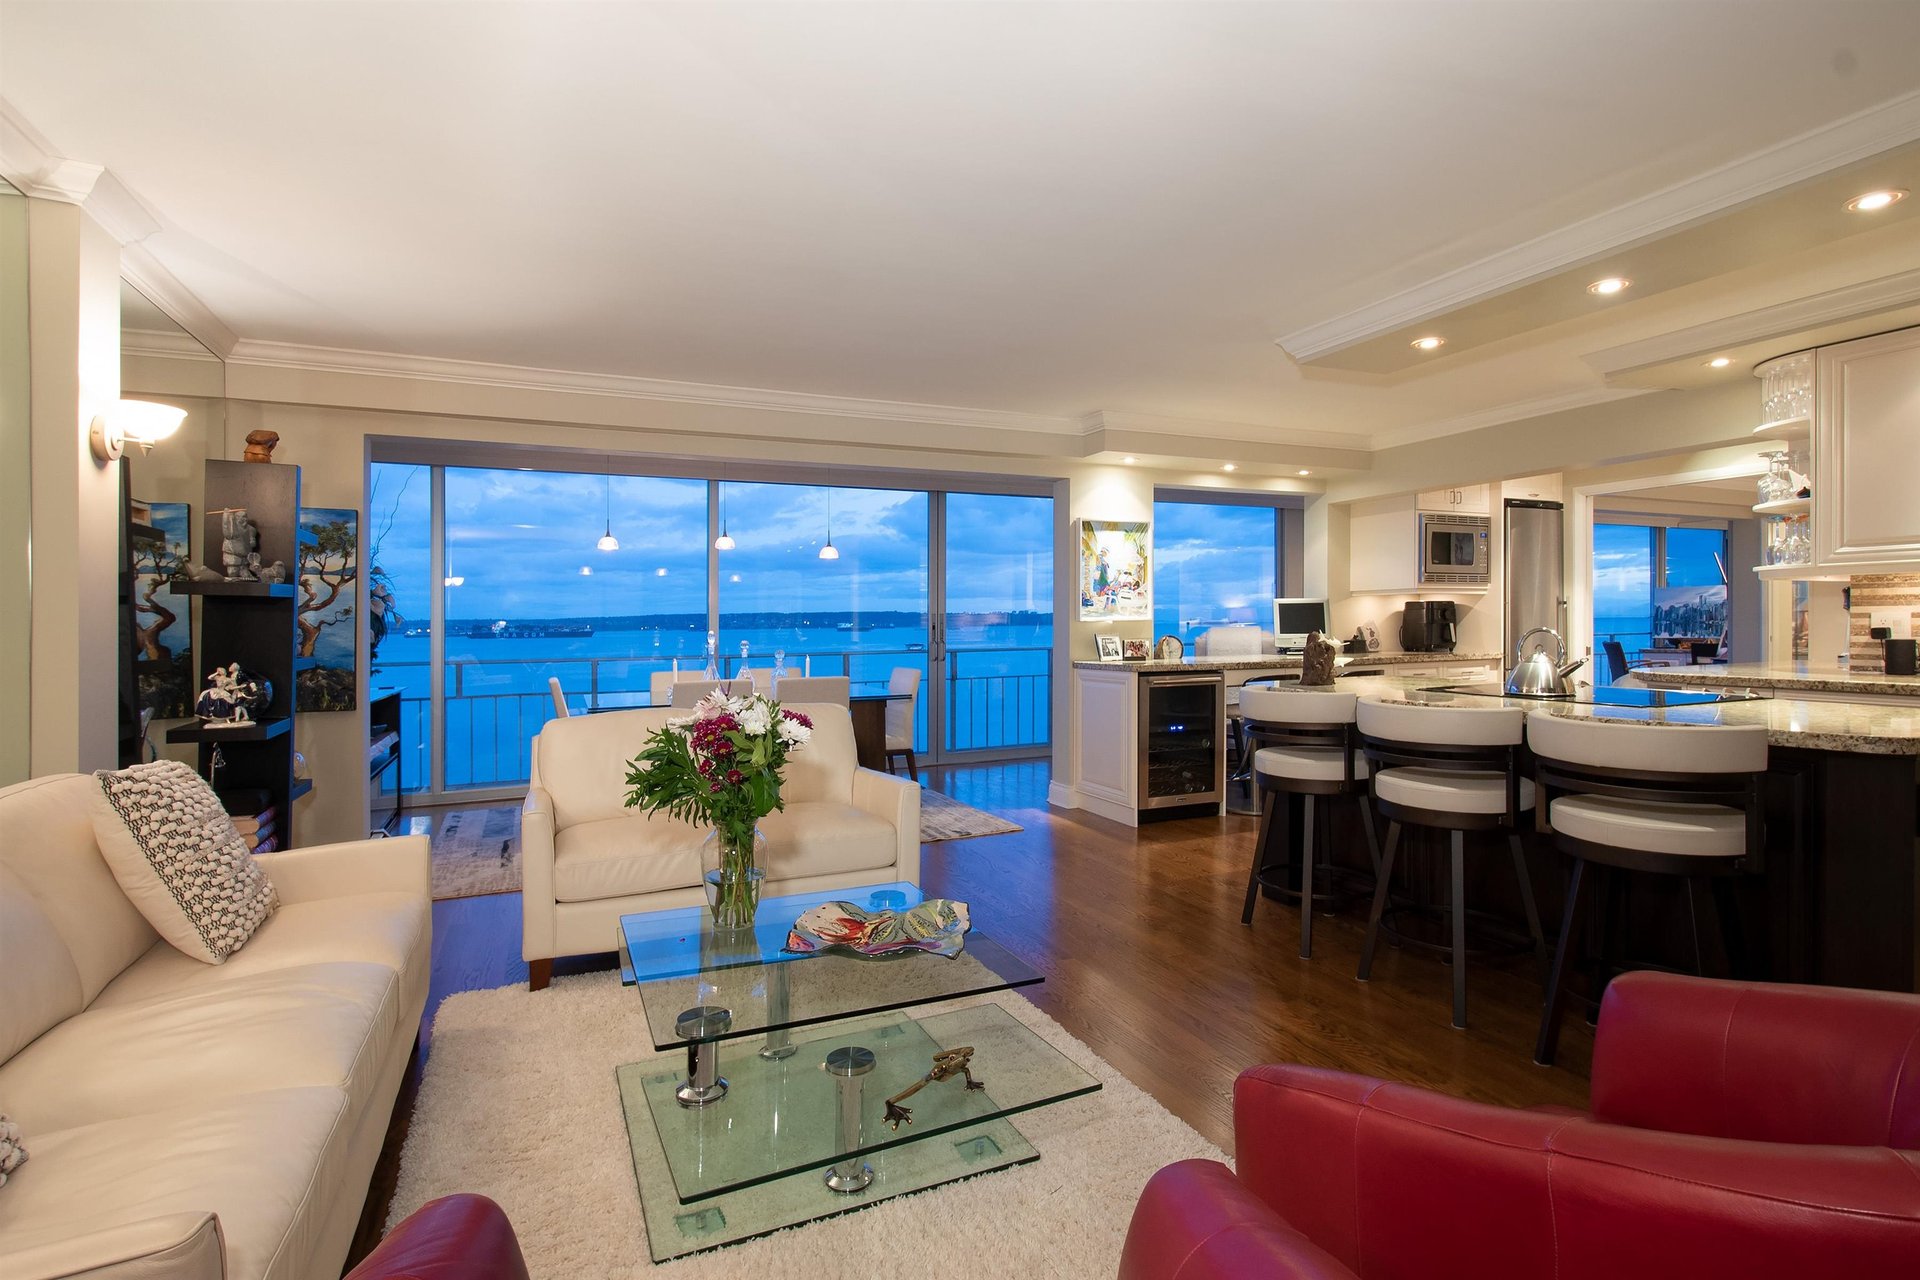 top 10 luxury sales of 2022 - pics and prices - west vancouver real estate